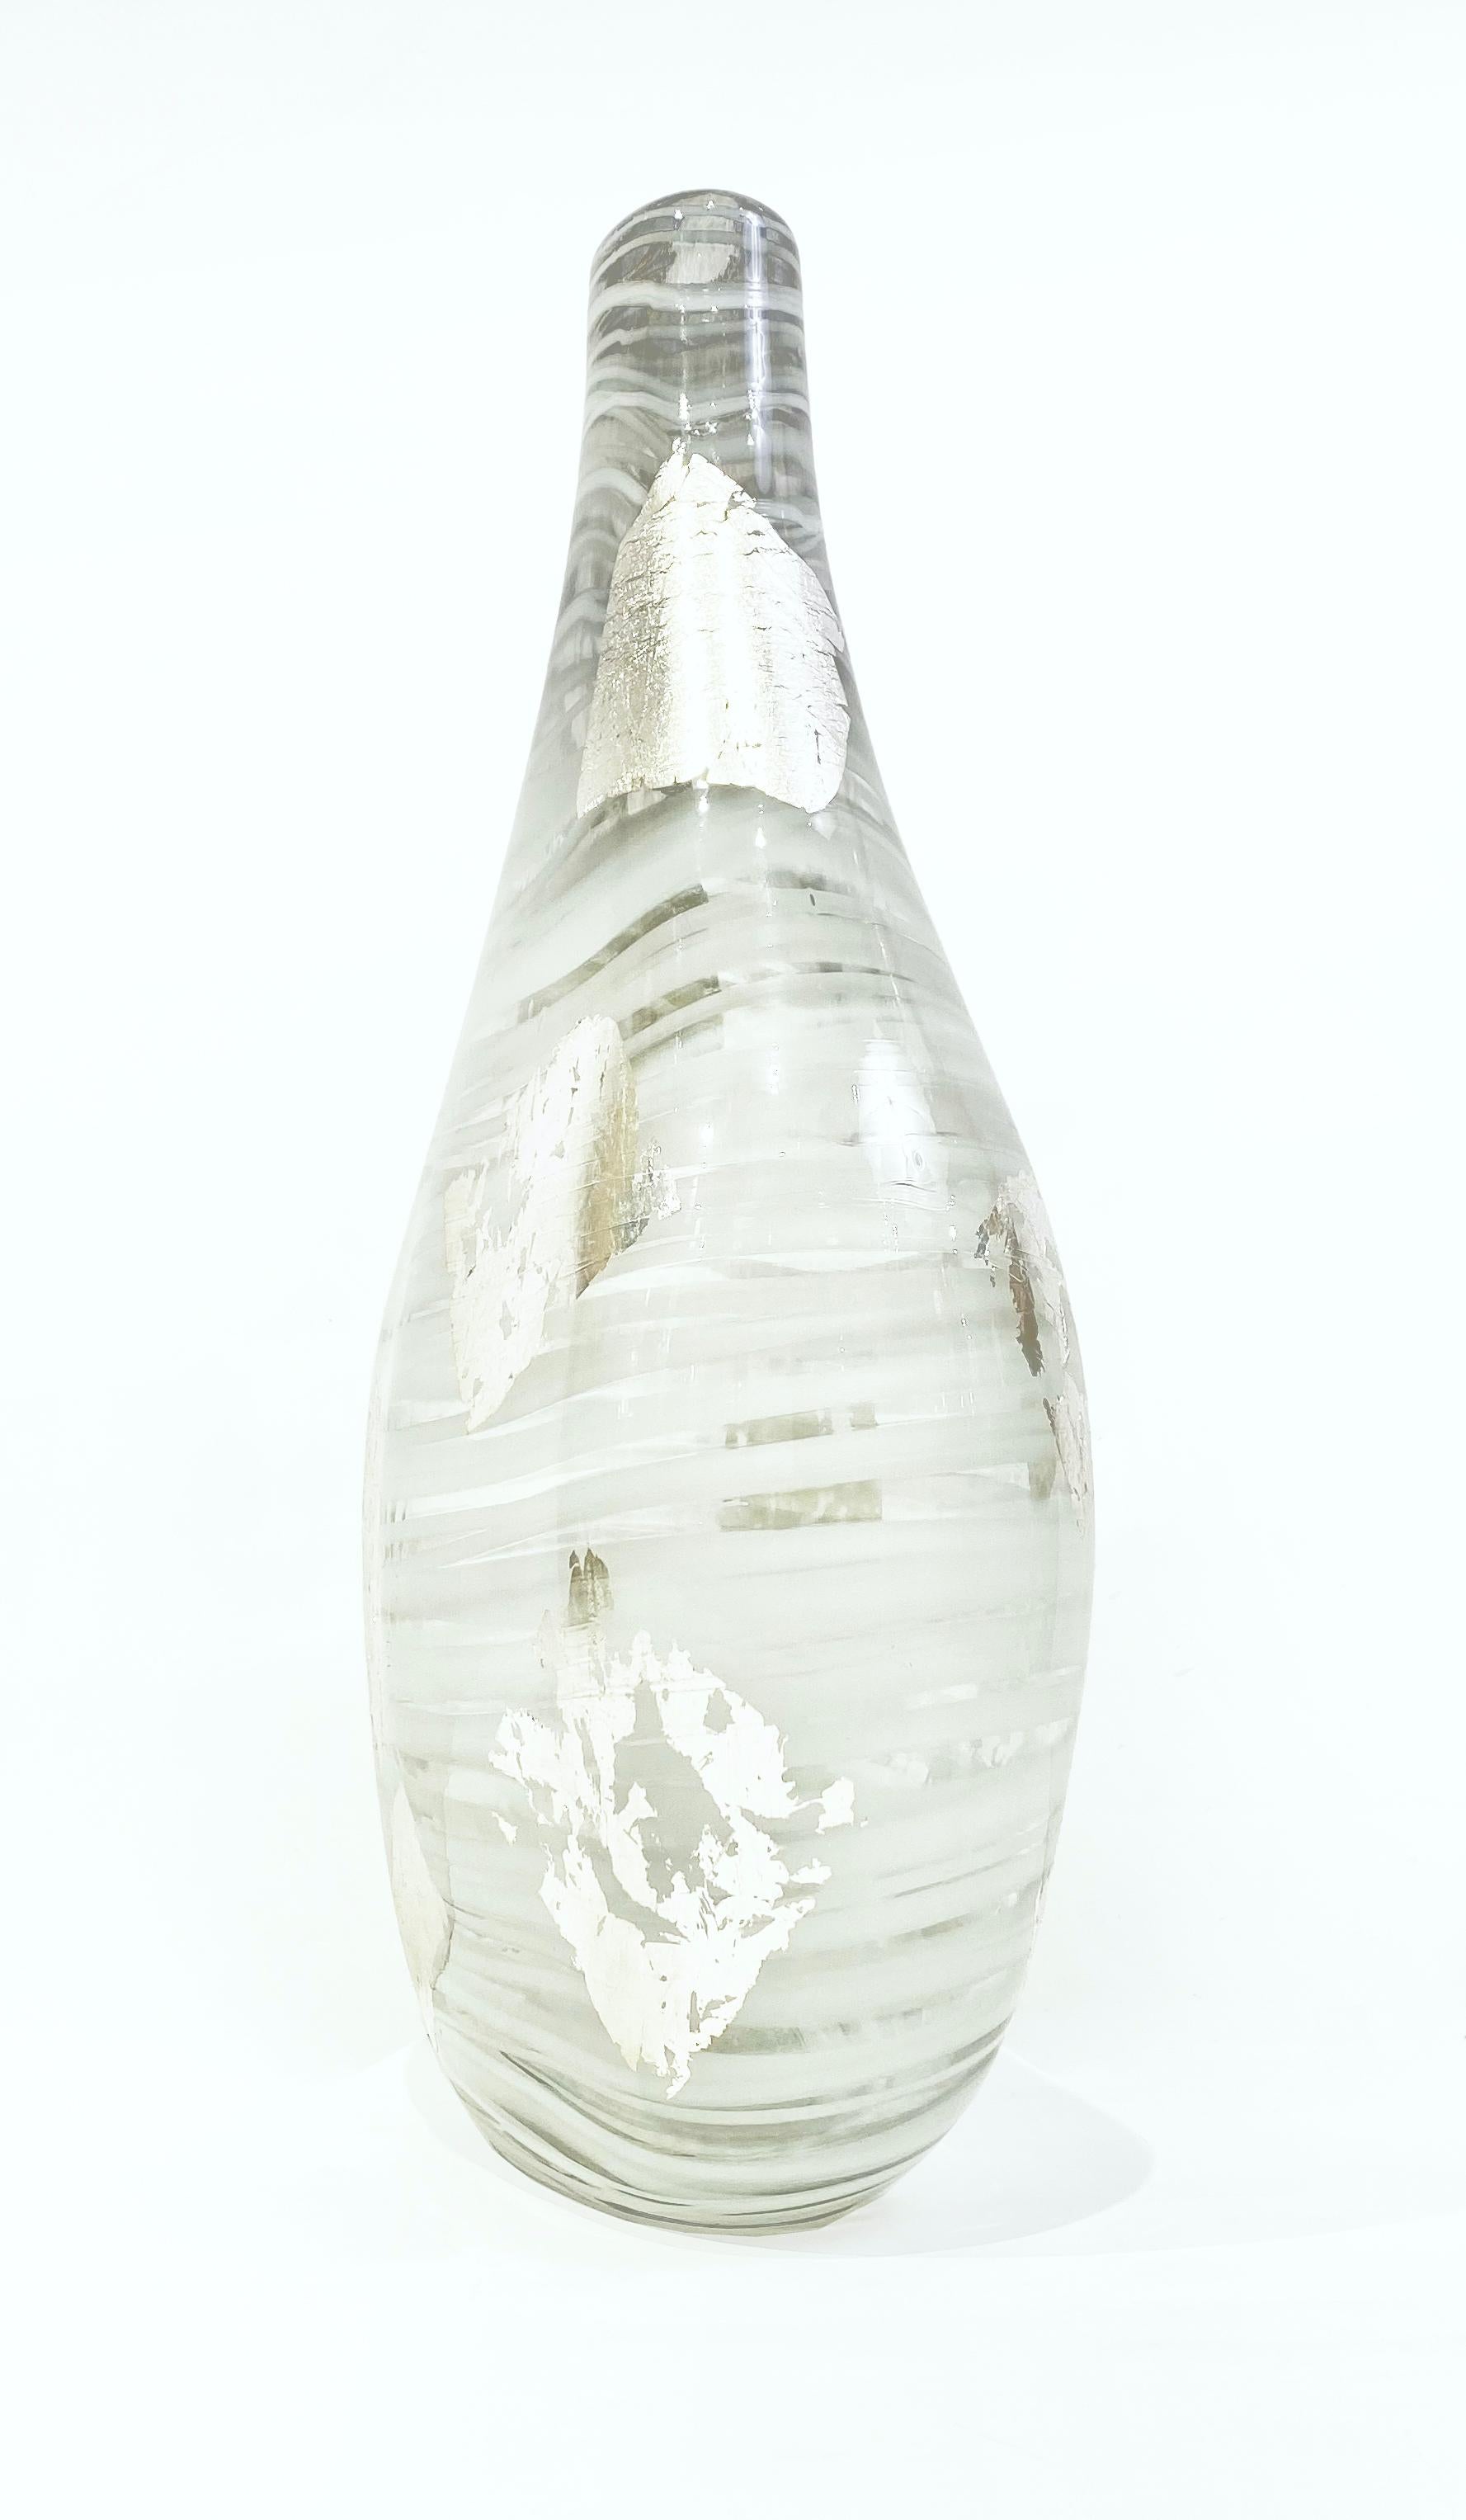 Italian Art Deco Style Silver Leaf White Clear Murano Glass Sculpture Vase For Sale 2